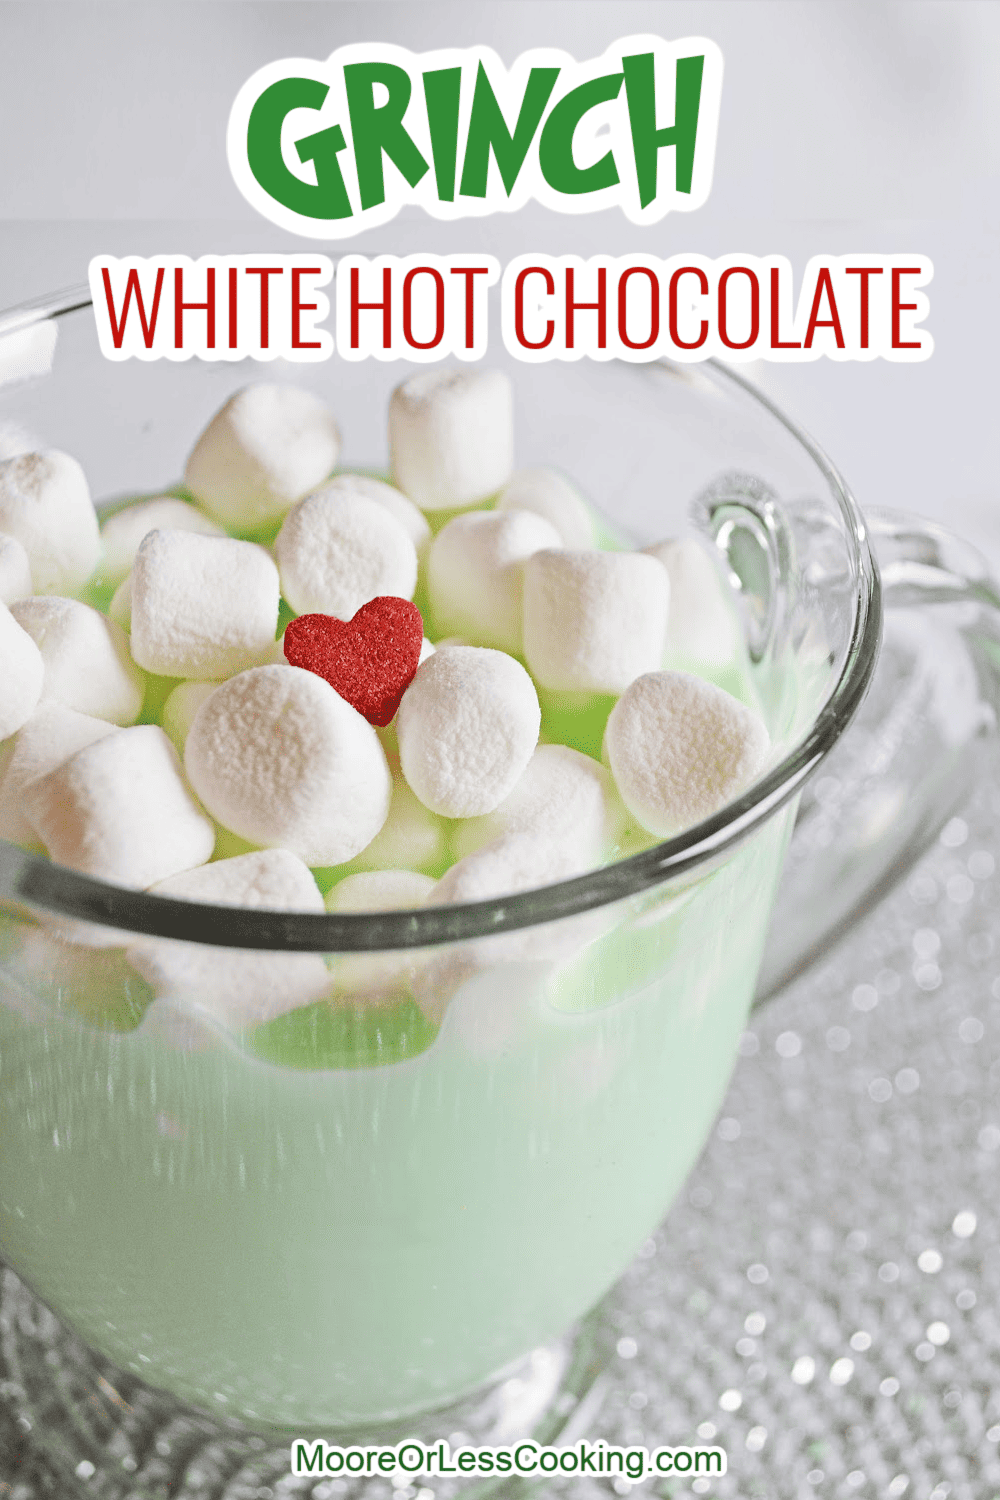 Creamy and delicious, this Grinch White Hot Chocolate recipe is a festive way to kick off the season. Cradle a cup of this warm and cozy green beverage while you watch your favorite Christmas movies. via @Mooreorlesscook